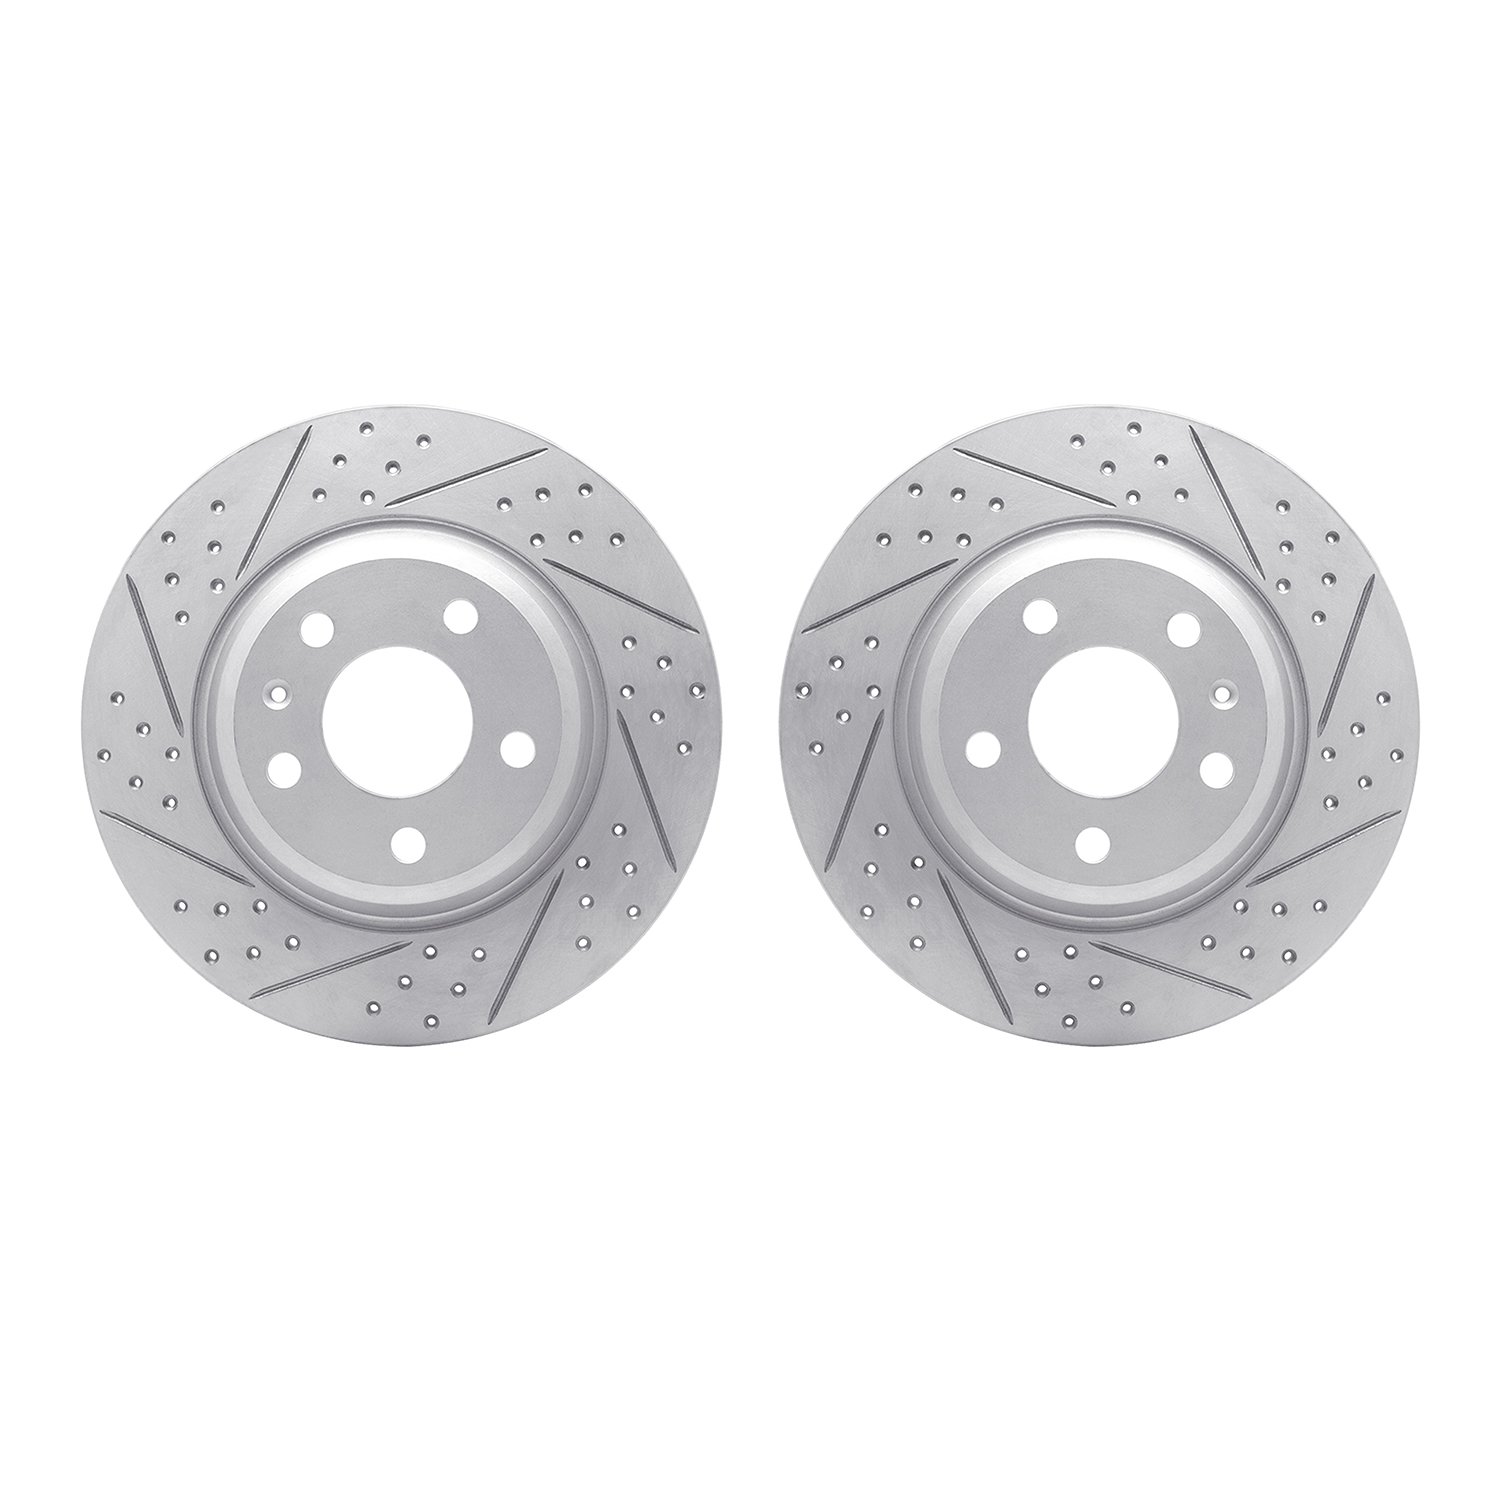 2002-73031 Geoperformance Drilled/Slotted Brake Rotors, Fits Select Audi/Volkswagen, Position: Rear